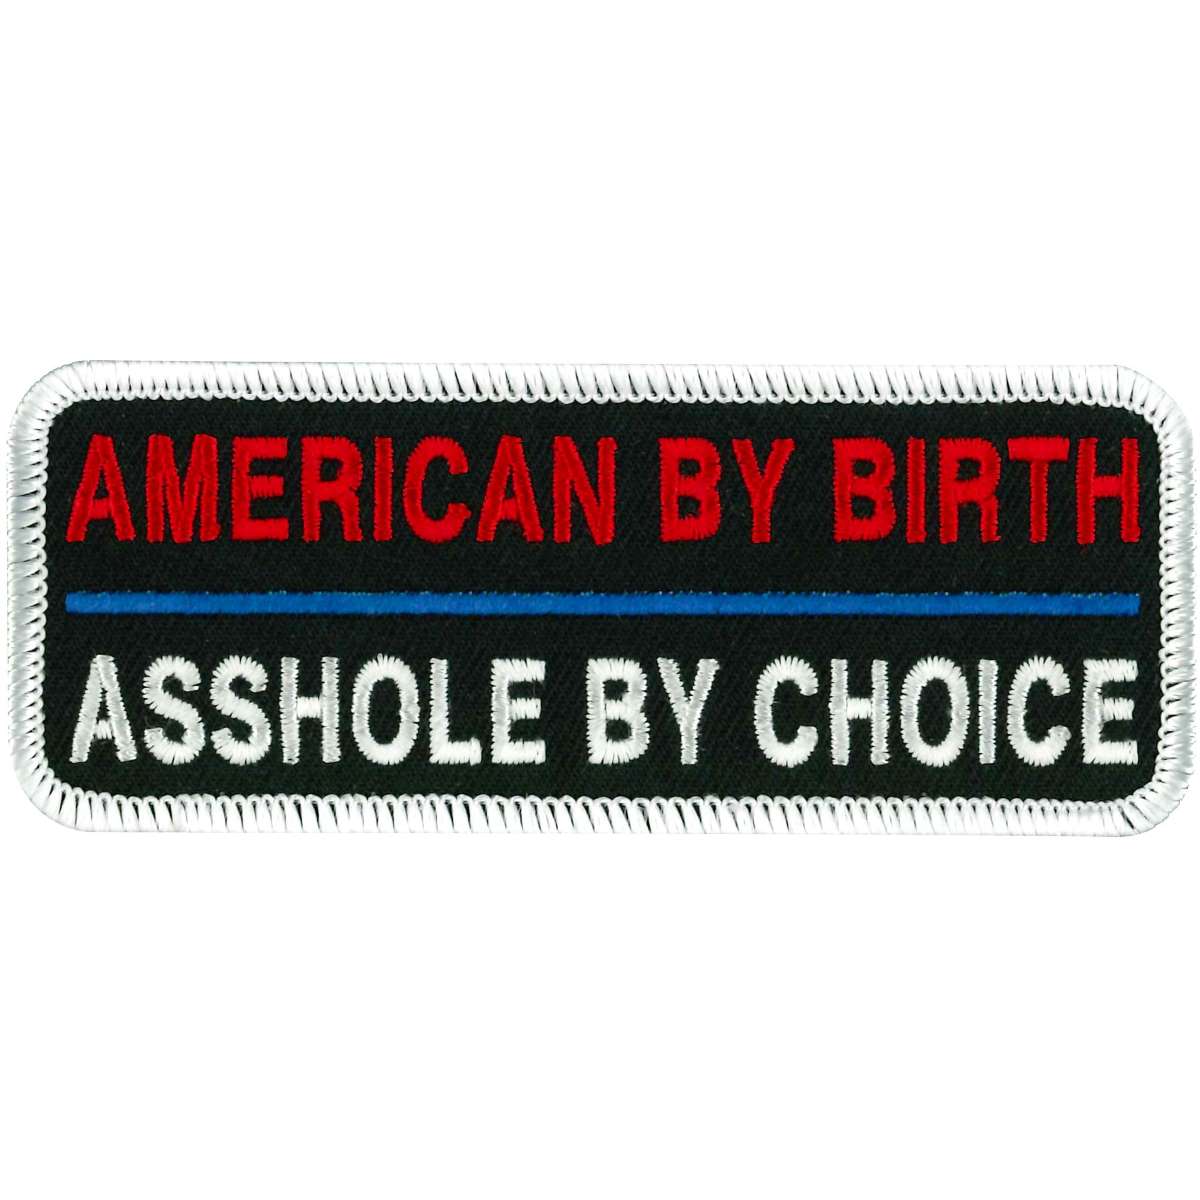 Hot Leathers PPL9154 Asshole by Choice 4" Patch PPL9154